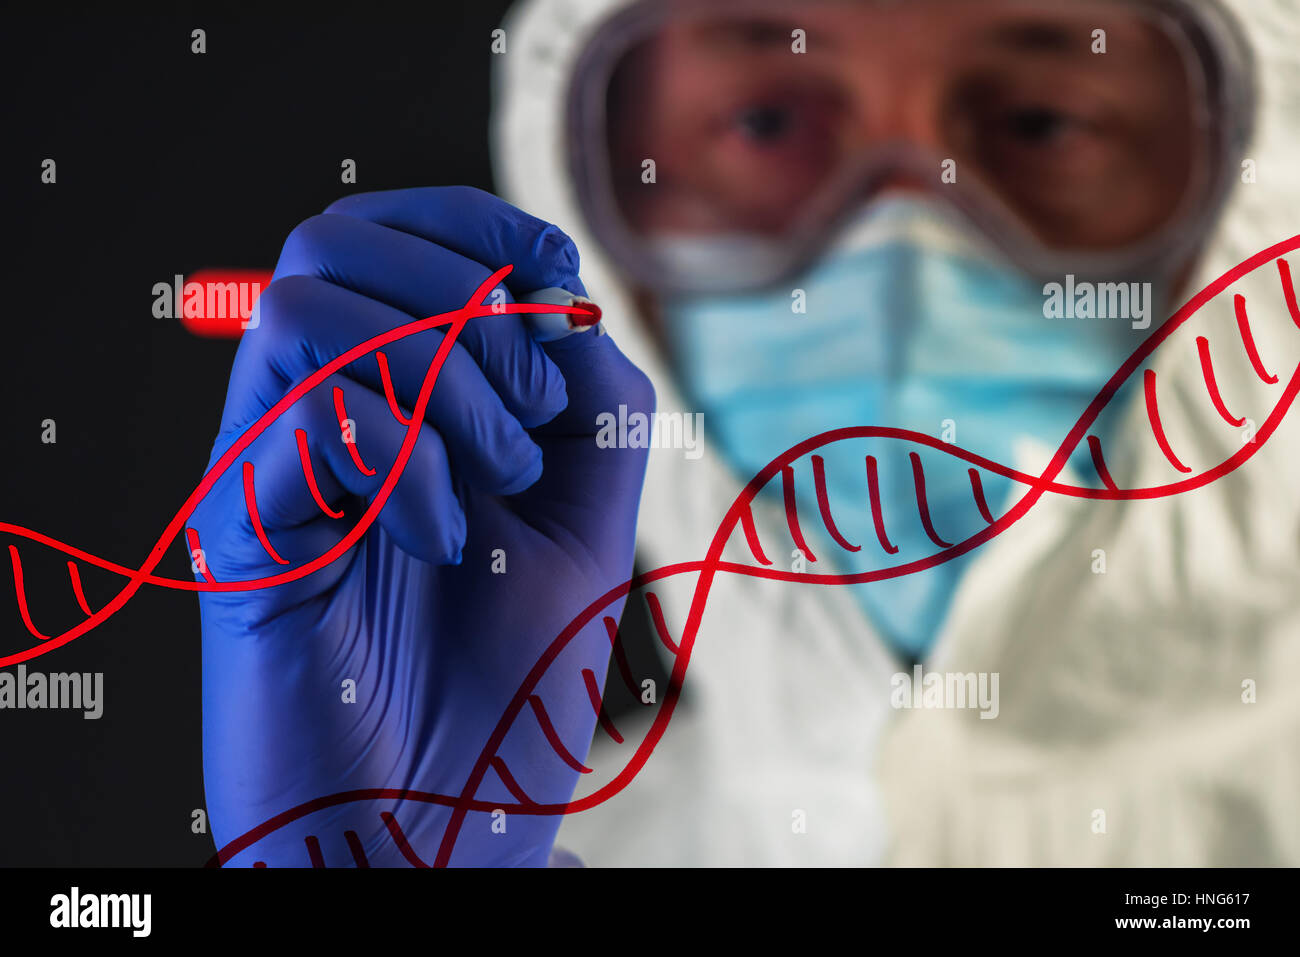 Genetic engineering and science, scientist wearing protective clothing working in laboratory Stock Photo